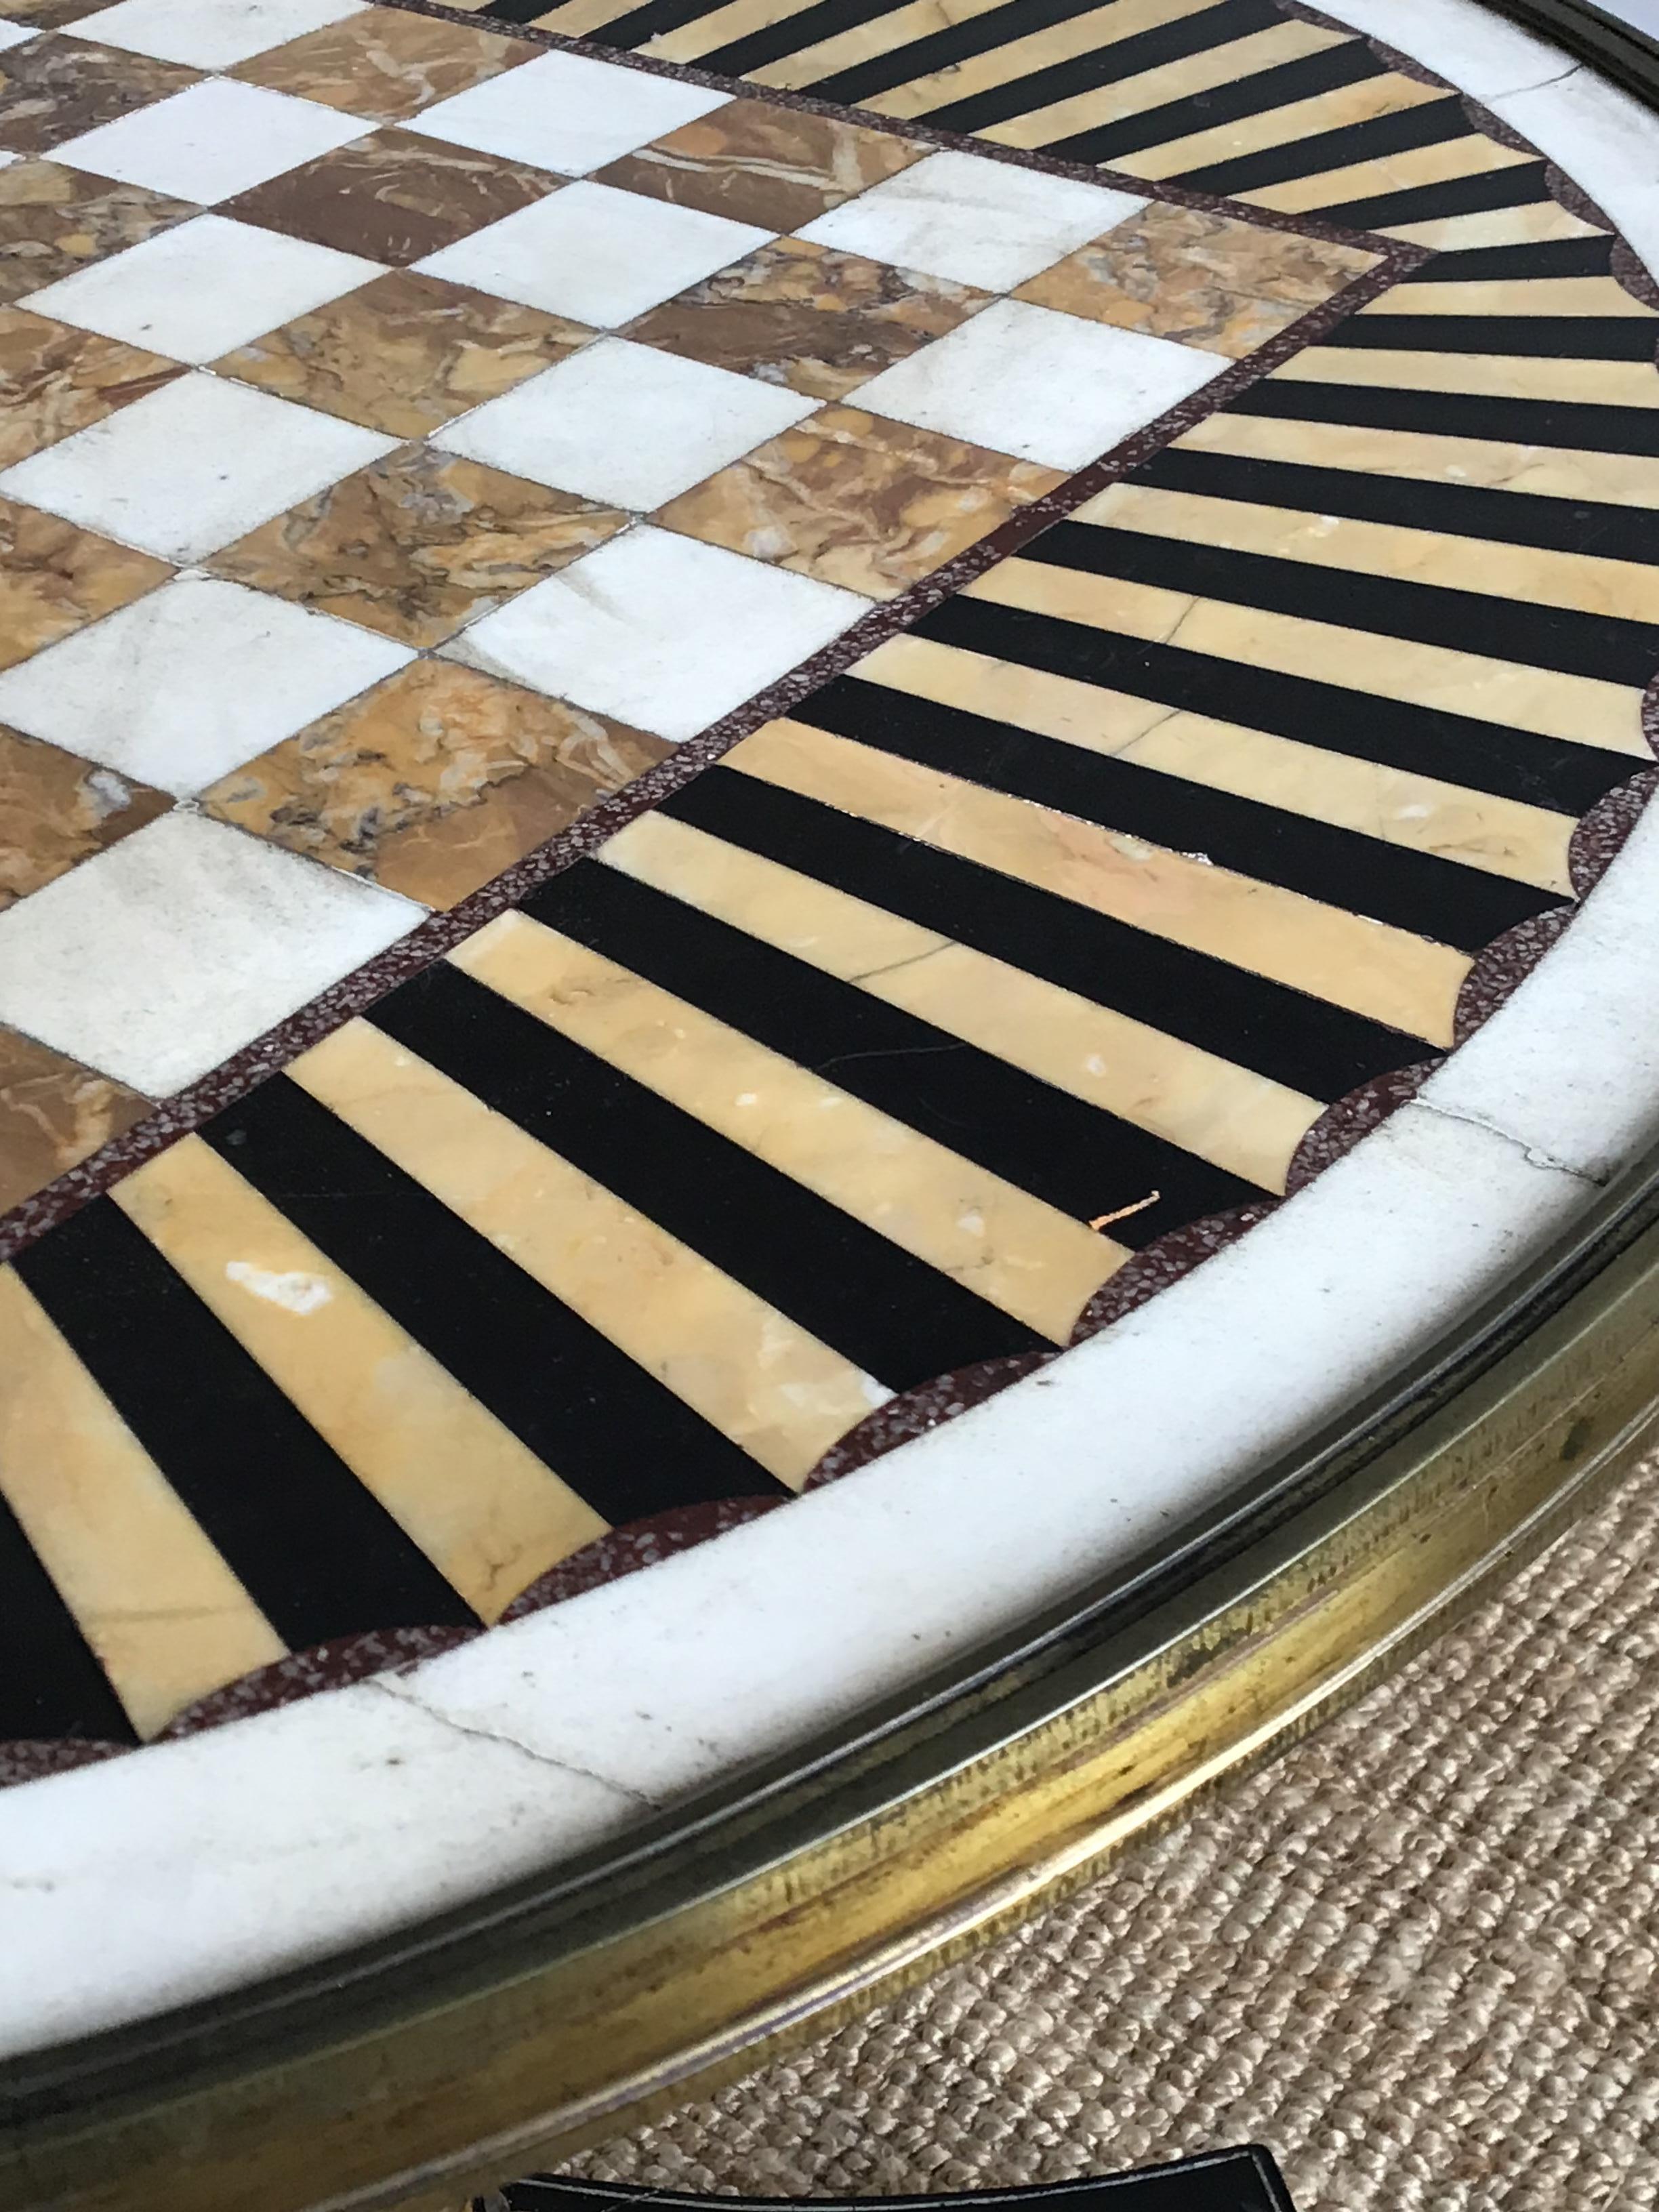 Early 19th century English Regency gilt metal bound games table with chess inset Sienna and Carrara marble with radiating bands of black and Sienna marble
The base ebonized and carved giltwood spiral twist fluted and lobed column to a triform